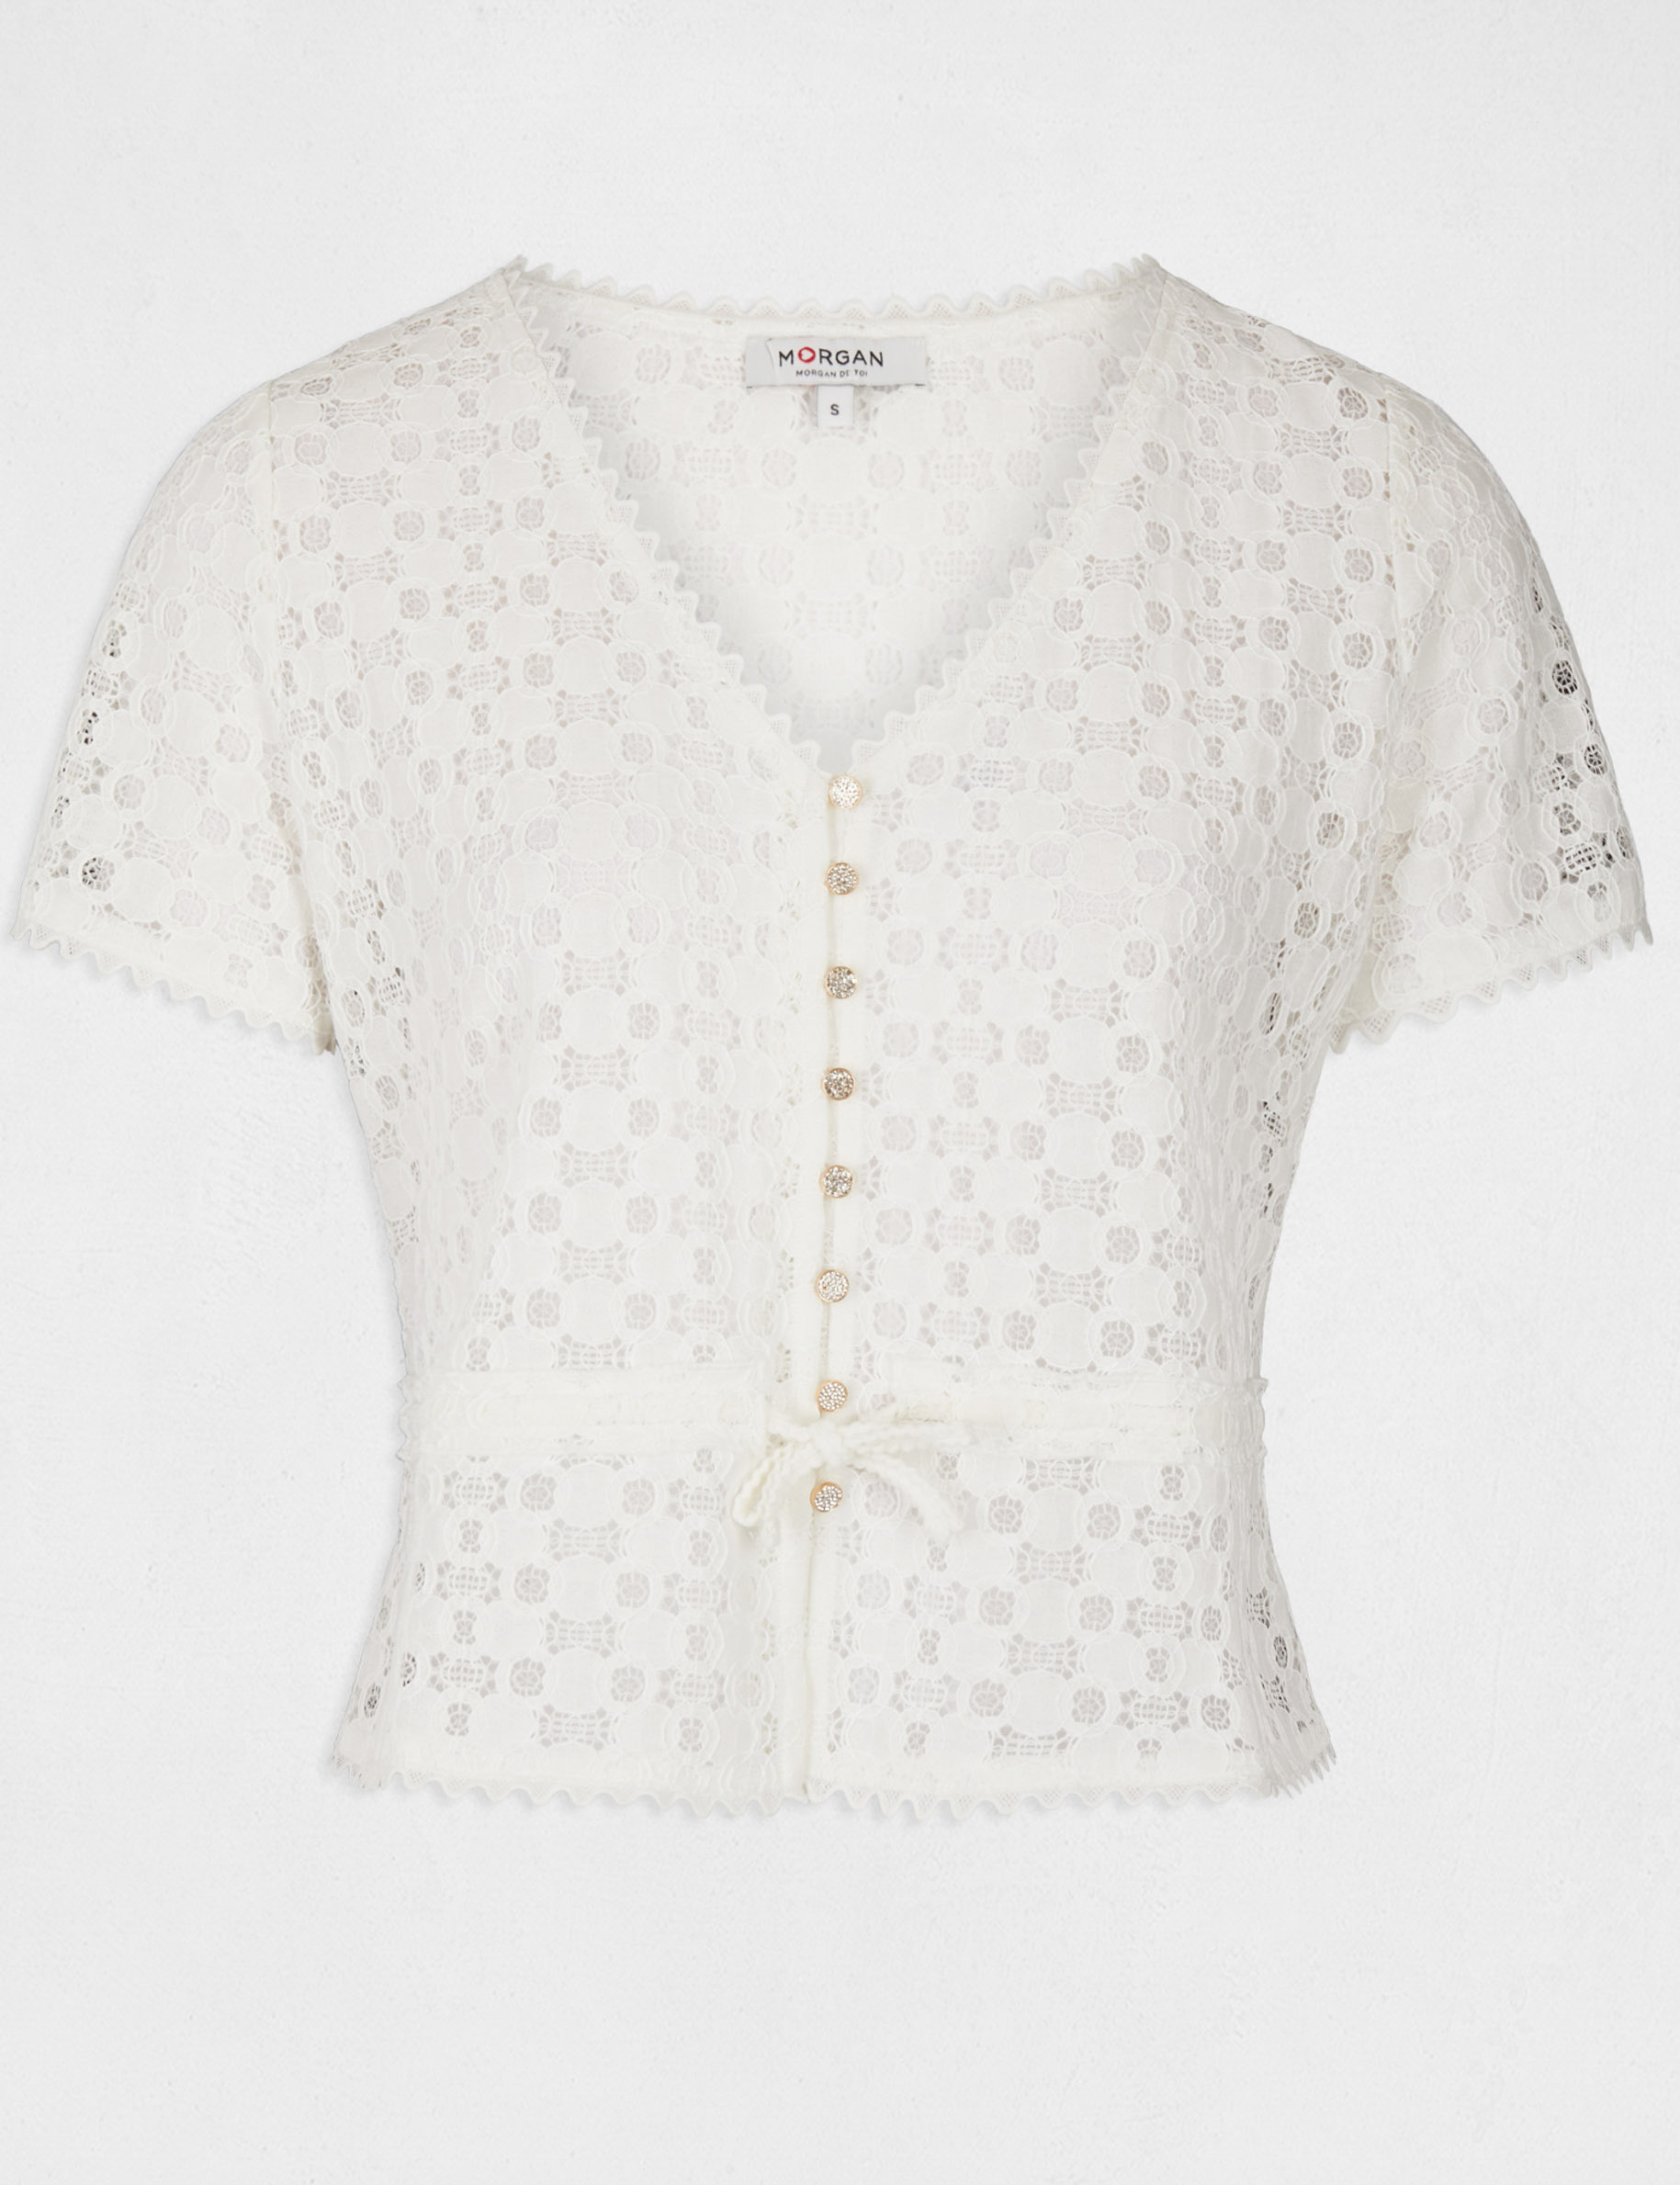 Short-sleeved t-shirt with lace ecru ladies'